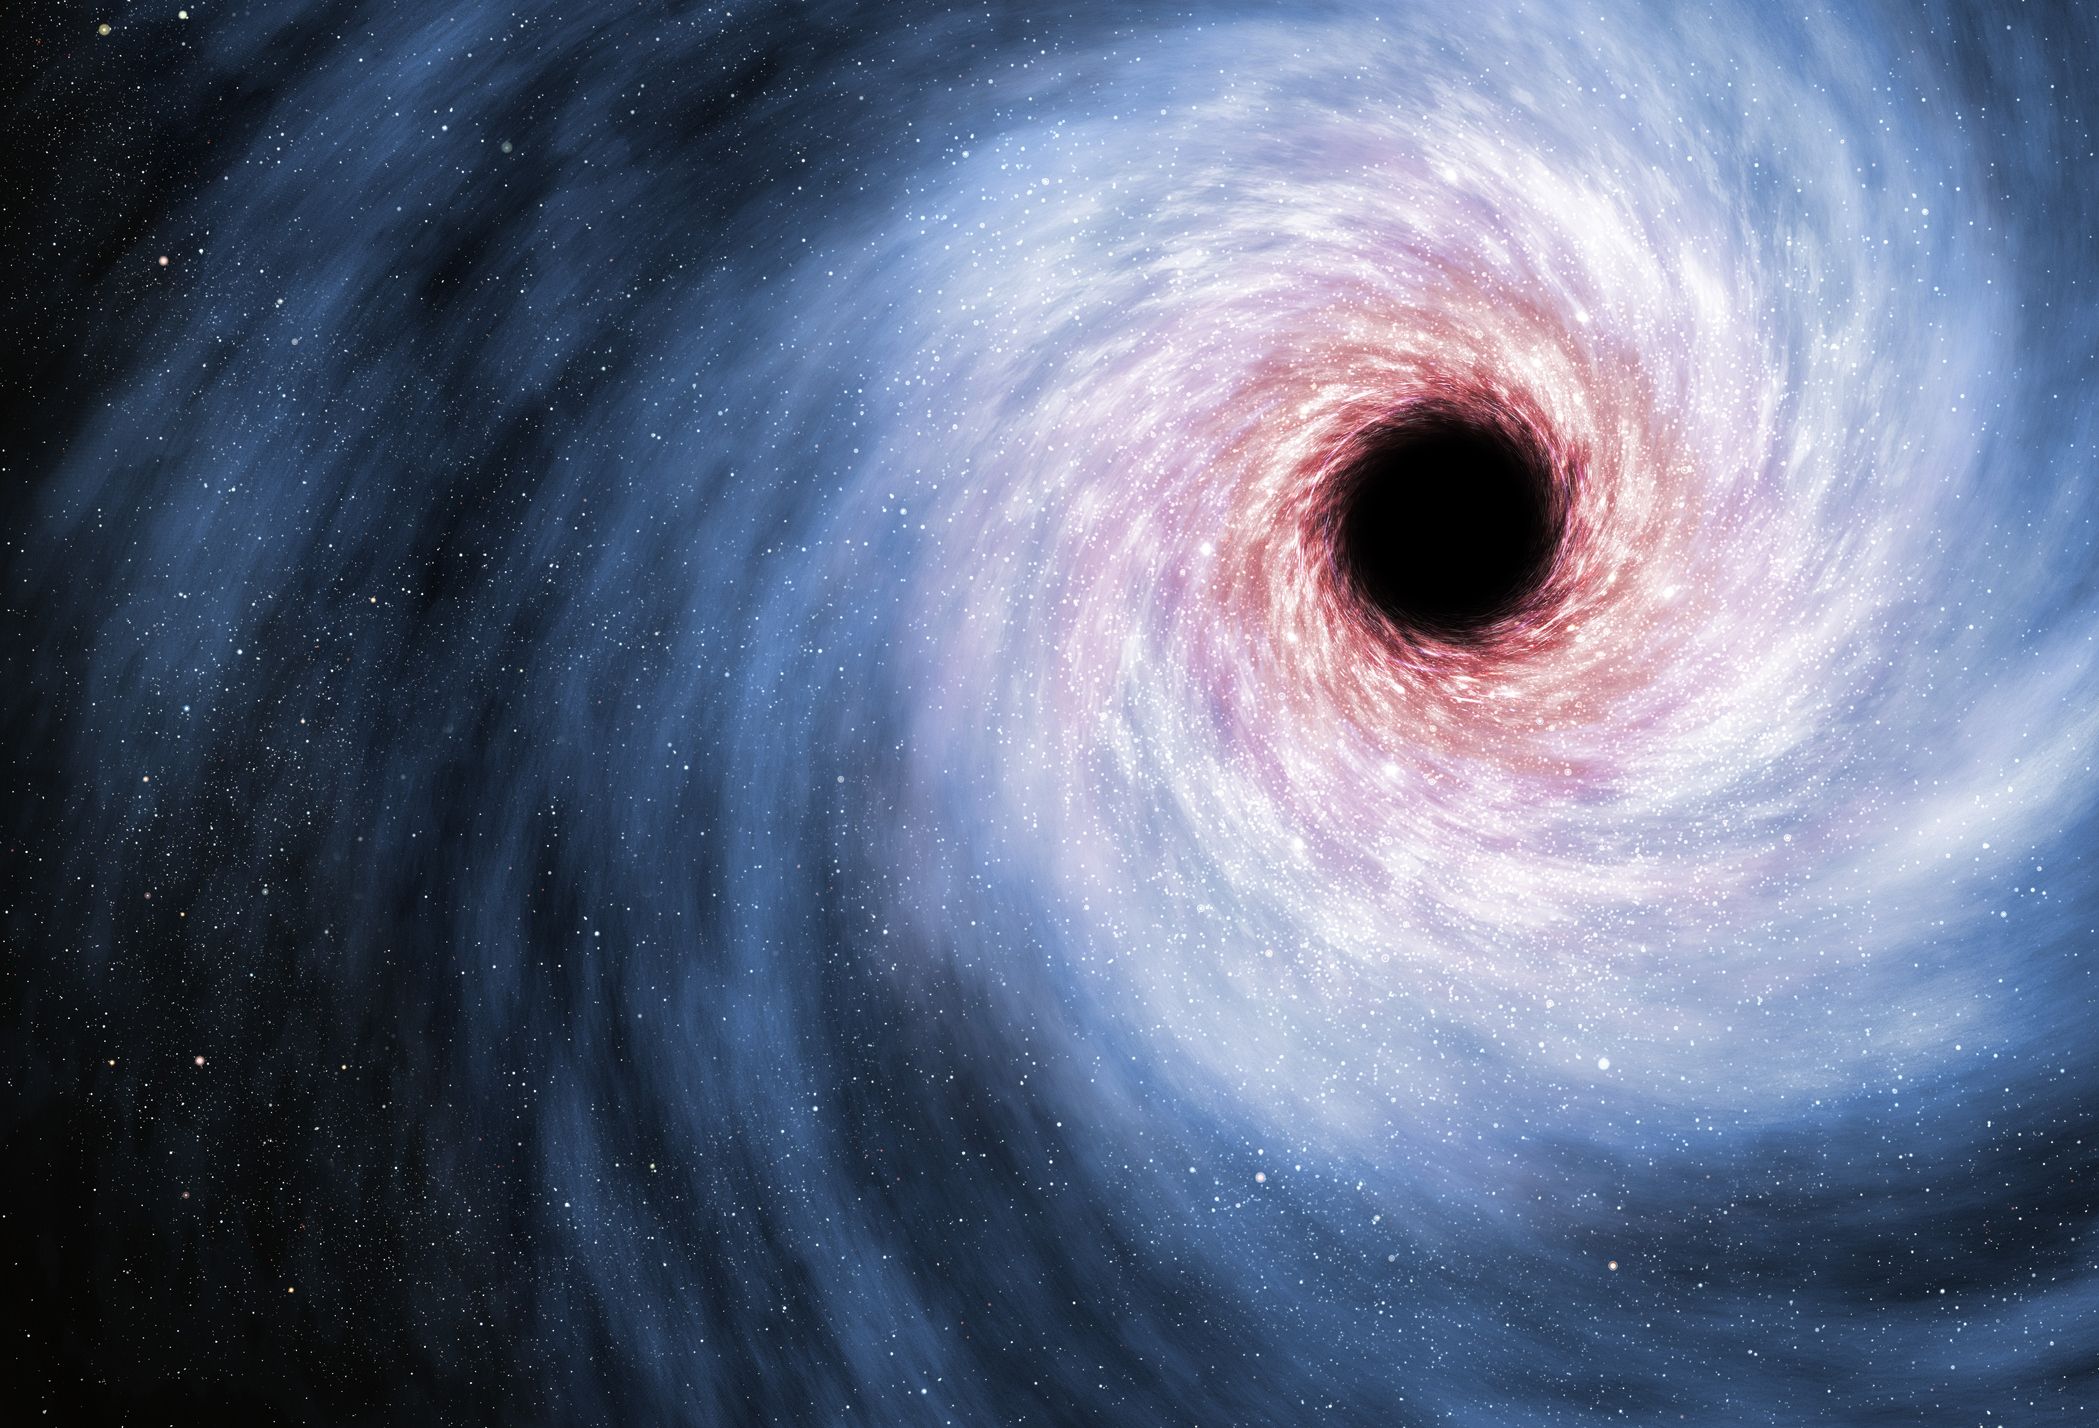 Newest Discovered Black Hole